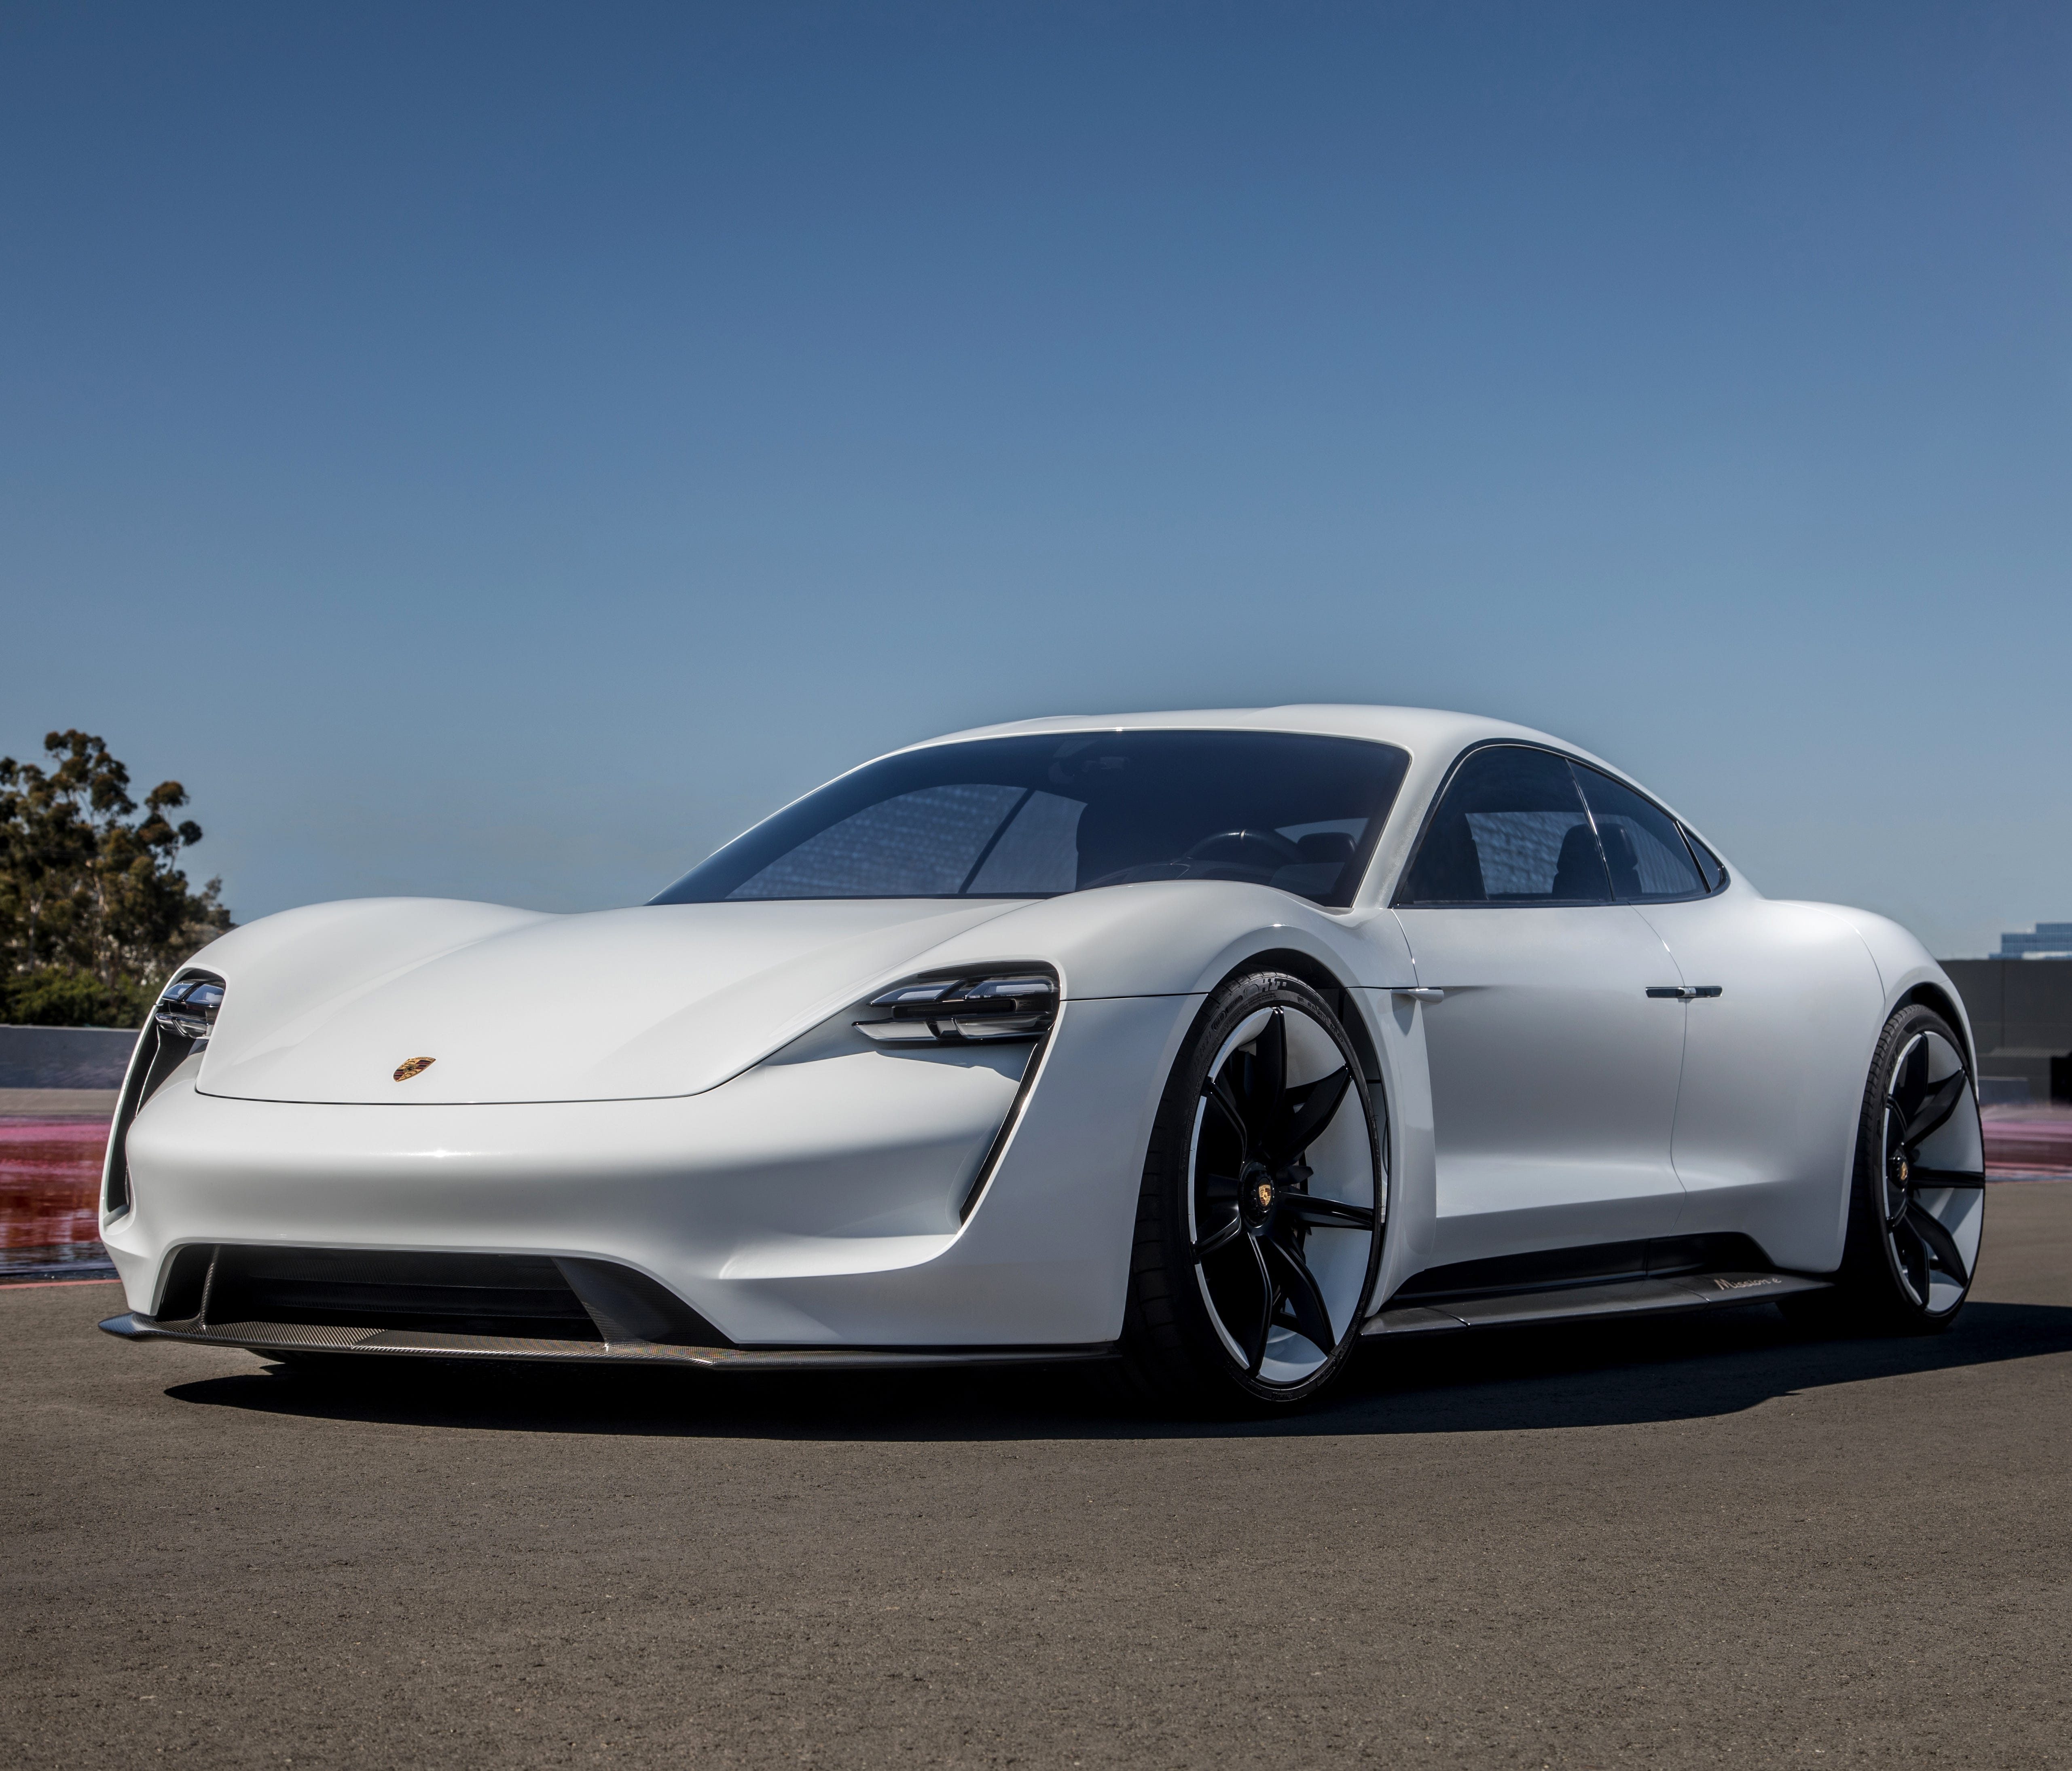 The Porsche Mission E sedan, the company's first all electric car, recently hit the track in Los Angeles.